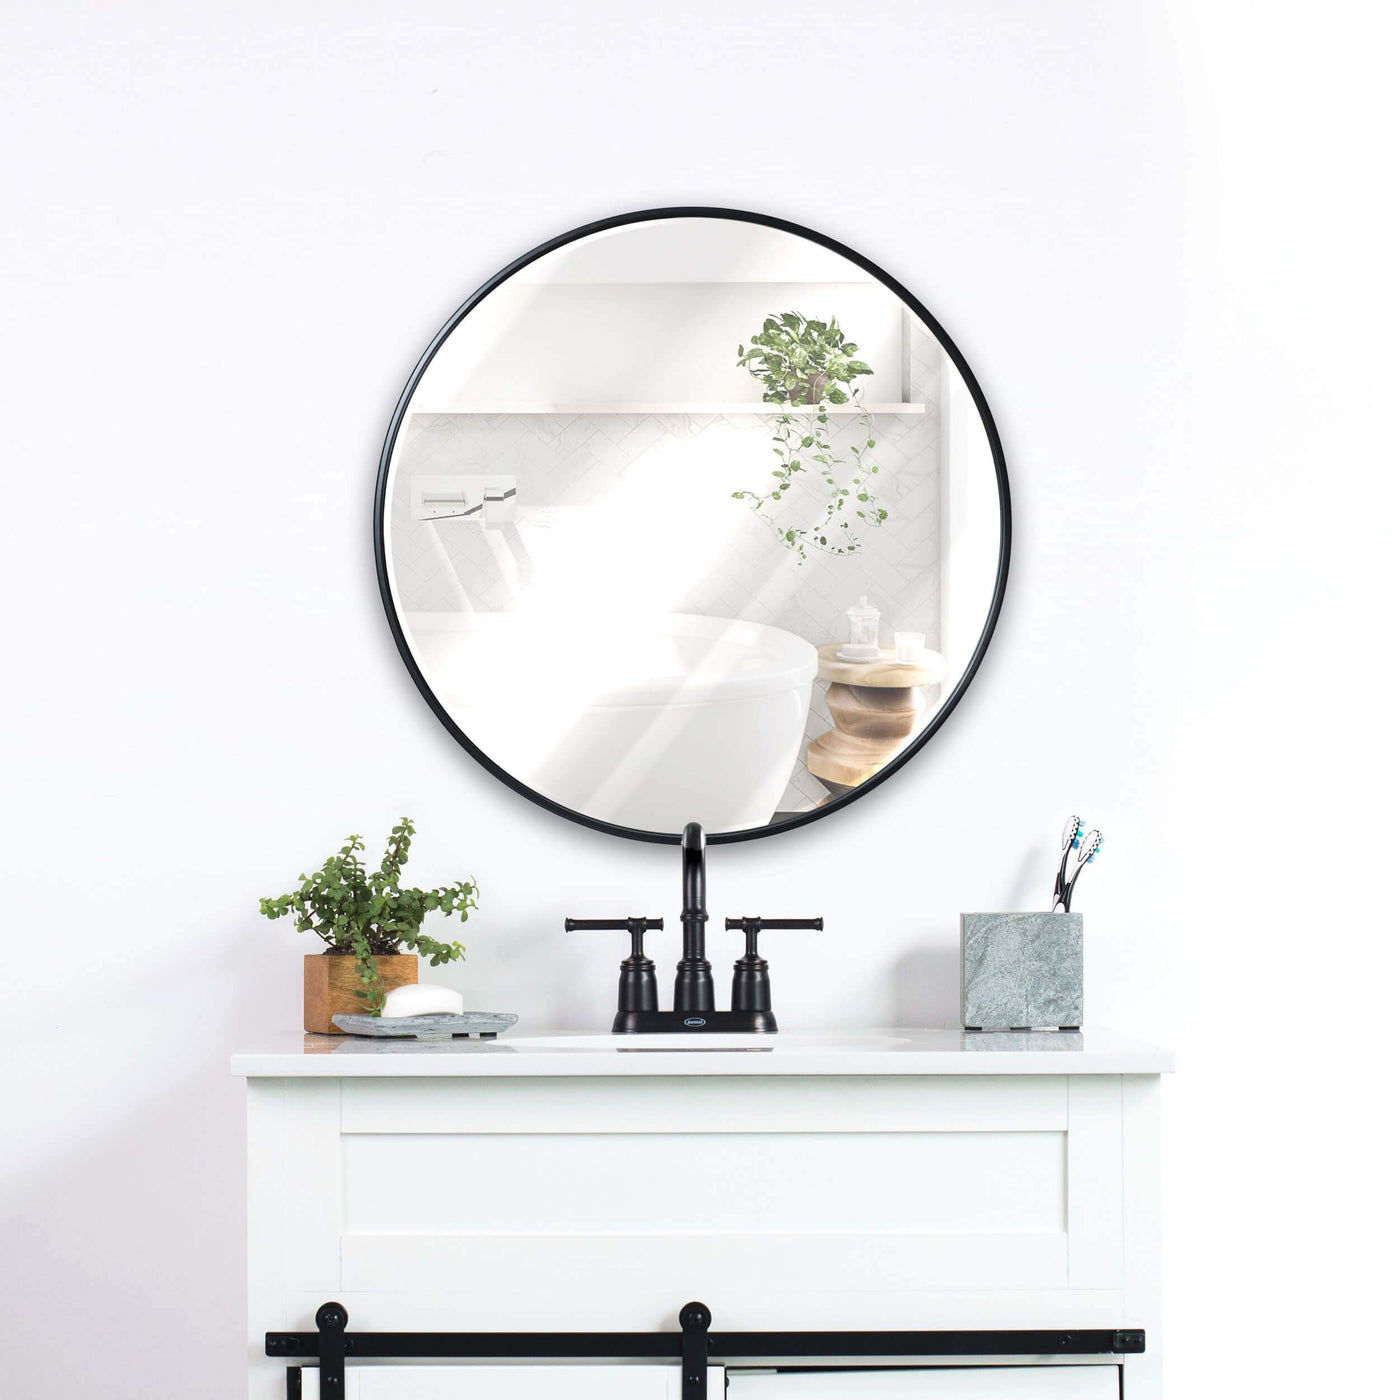 24" Round Wall Mirror With Thin Metal Frame